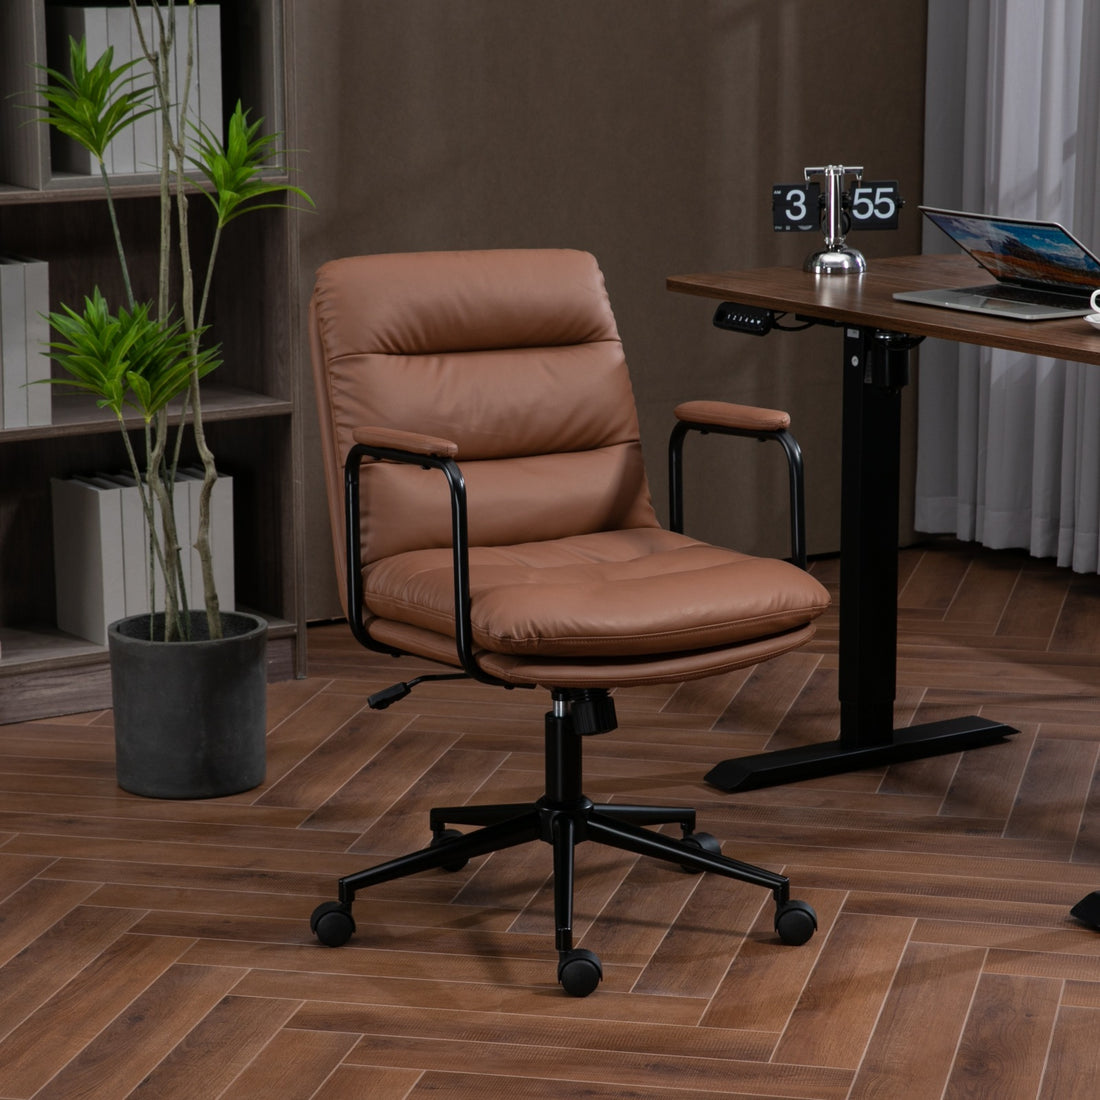 Office Chair,Mid Back Home Office Desk Task Chair with brown-office-american design-foam-pu leather